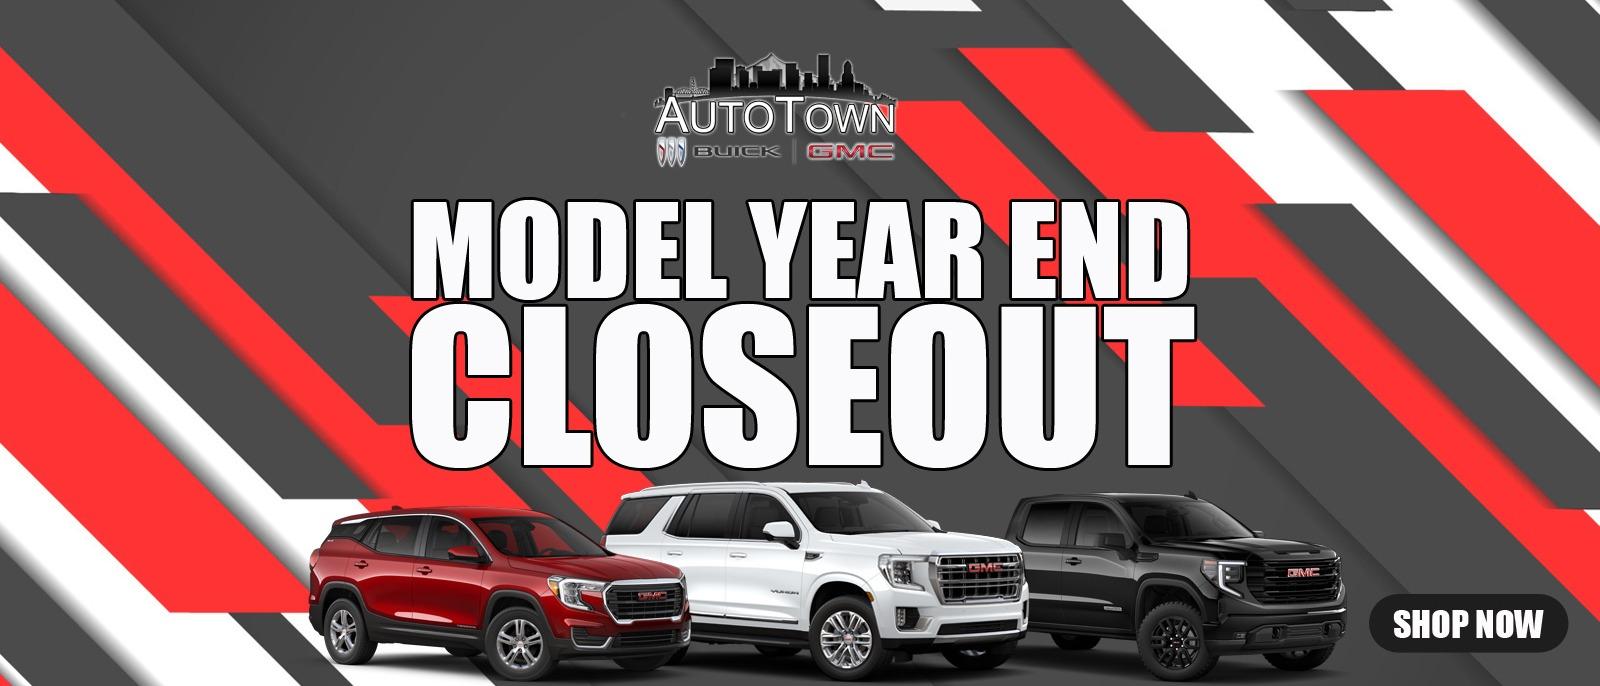 Model Year End Closeout  - Abstract Background with GMC vehicles